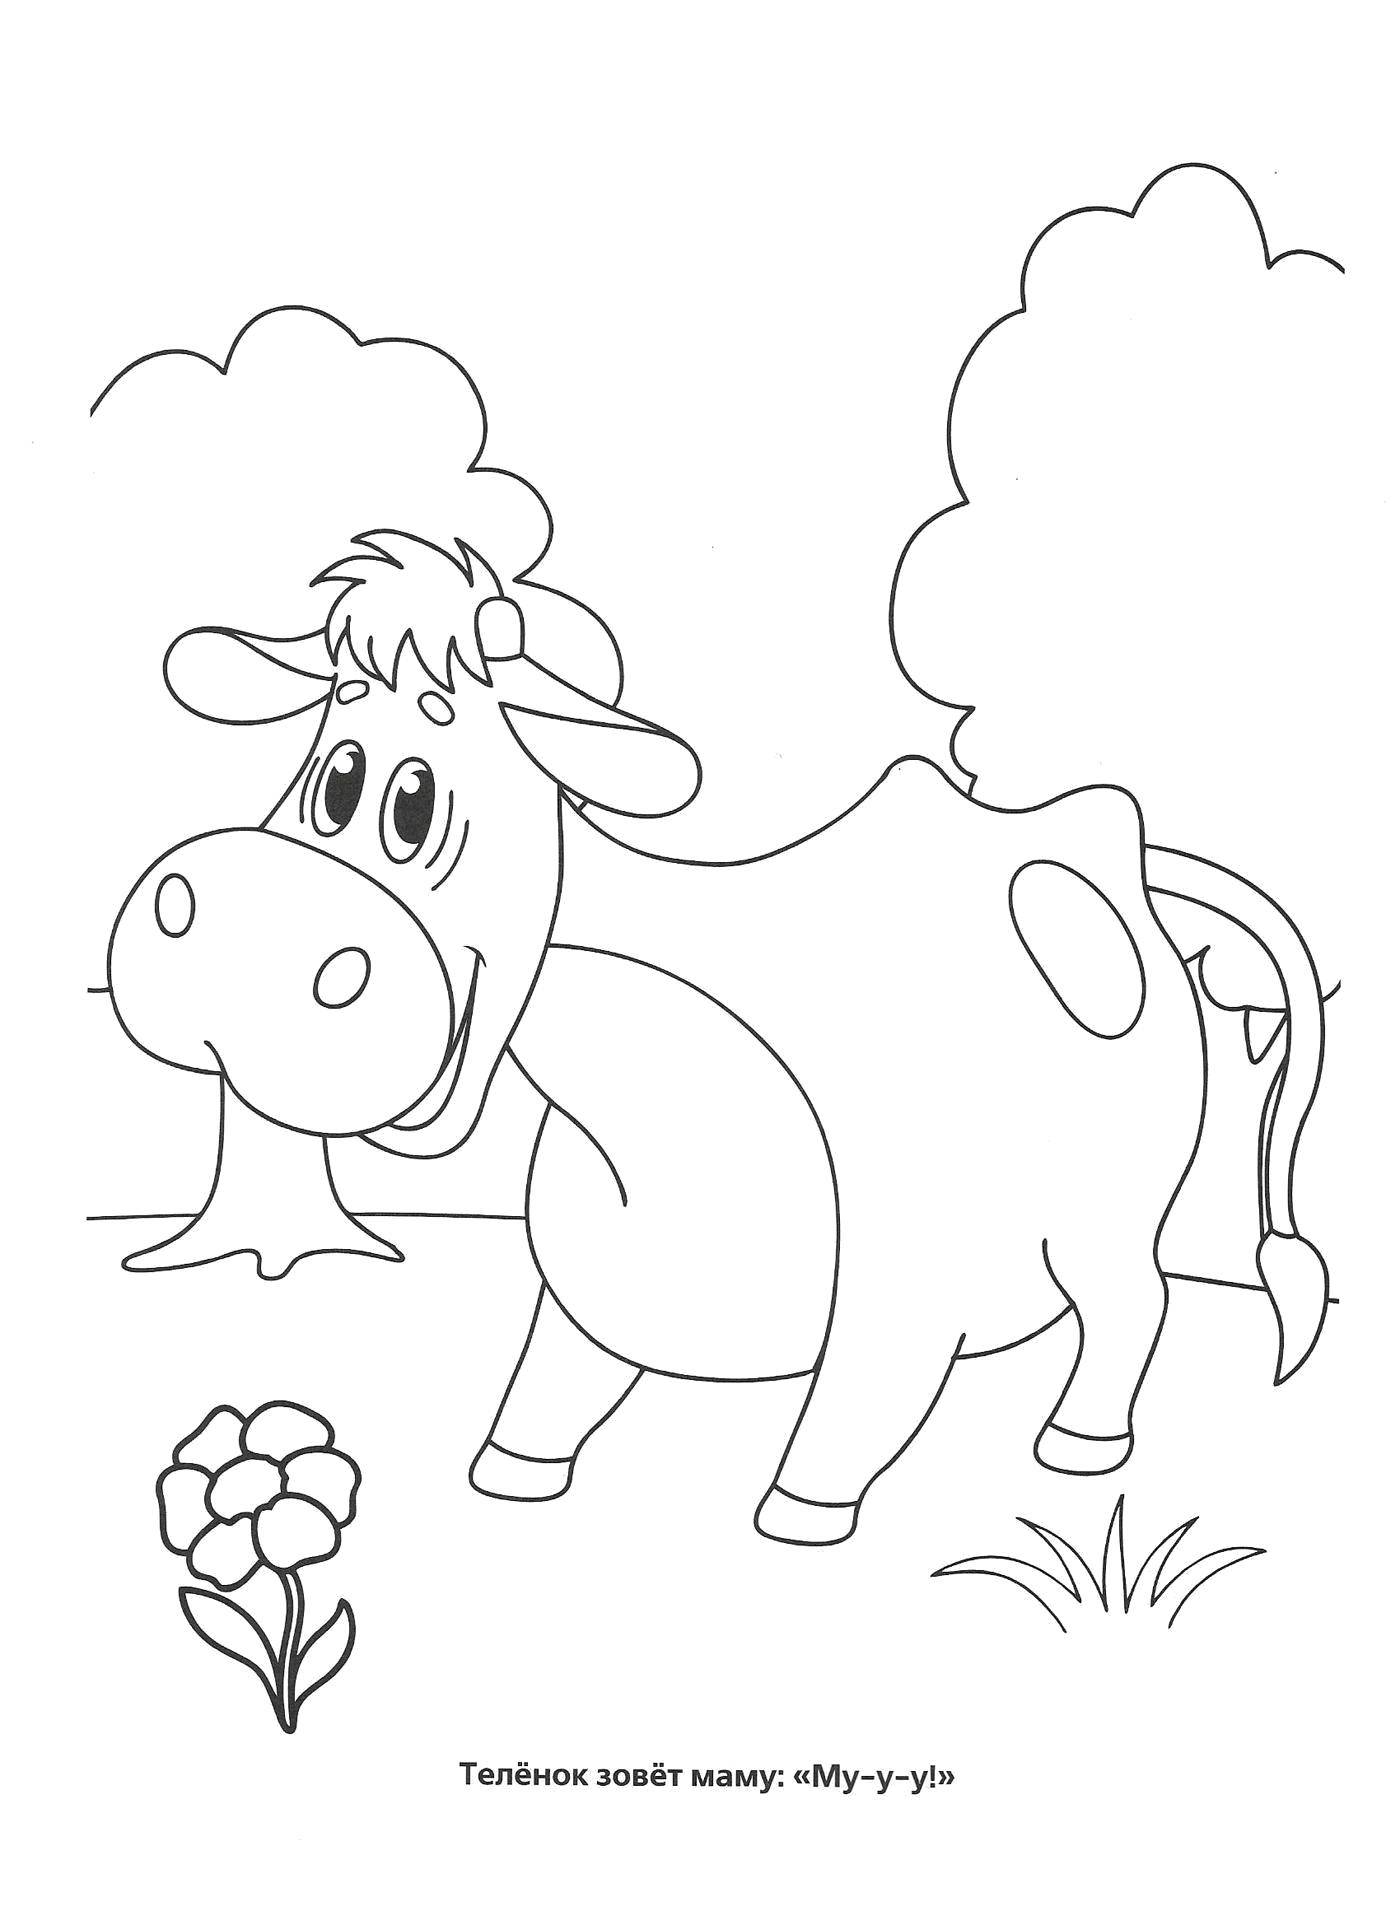 Coloring Calf of buttermilk . Category coloring, buttermilk. Tags:  Cartoon character, Buttermilk .